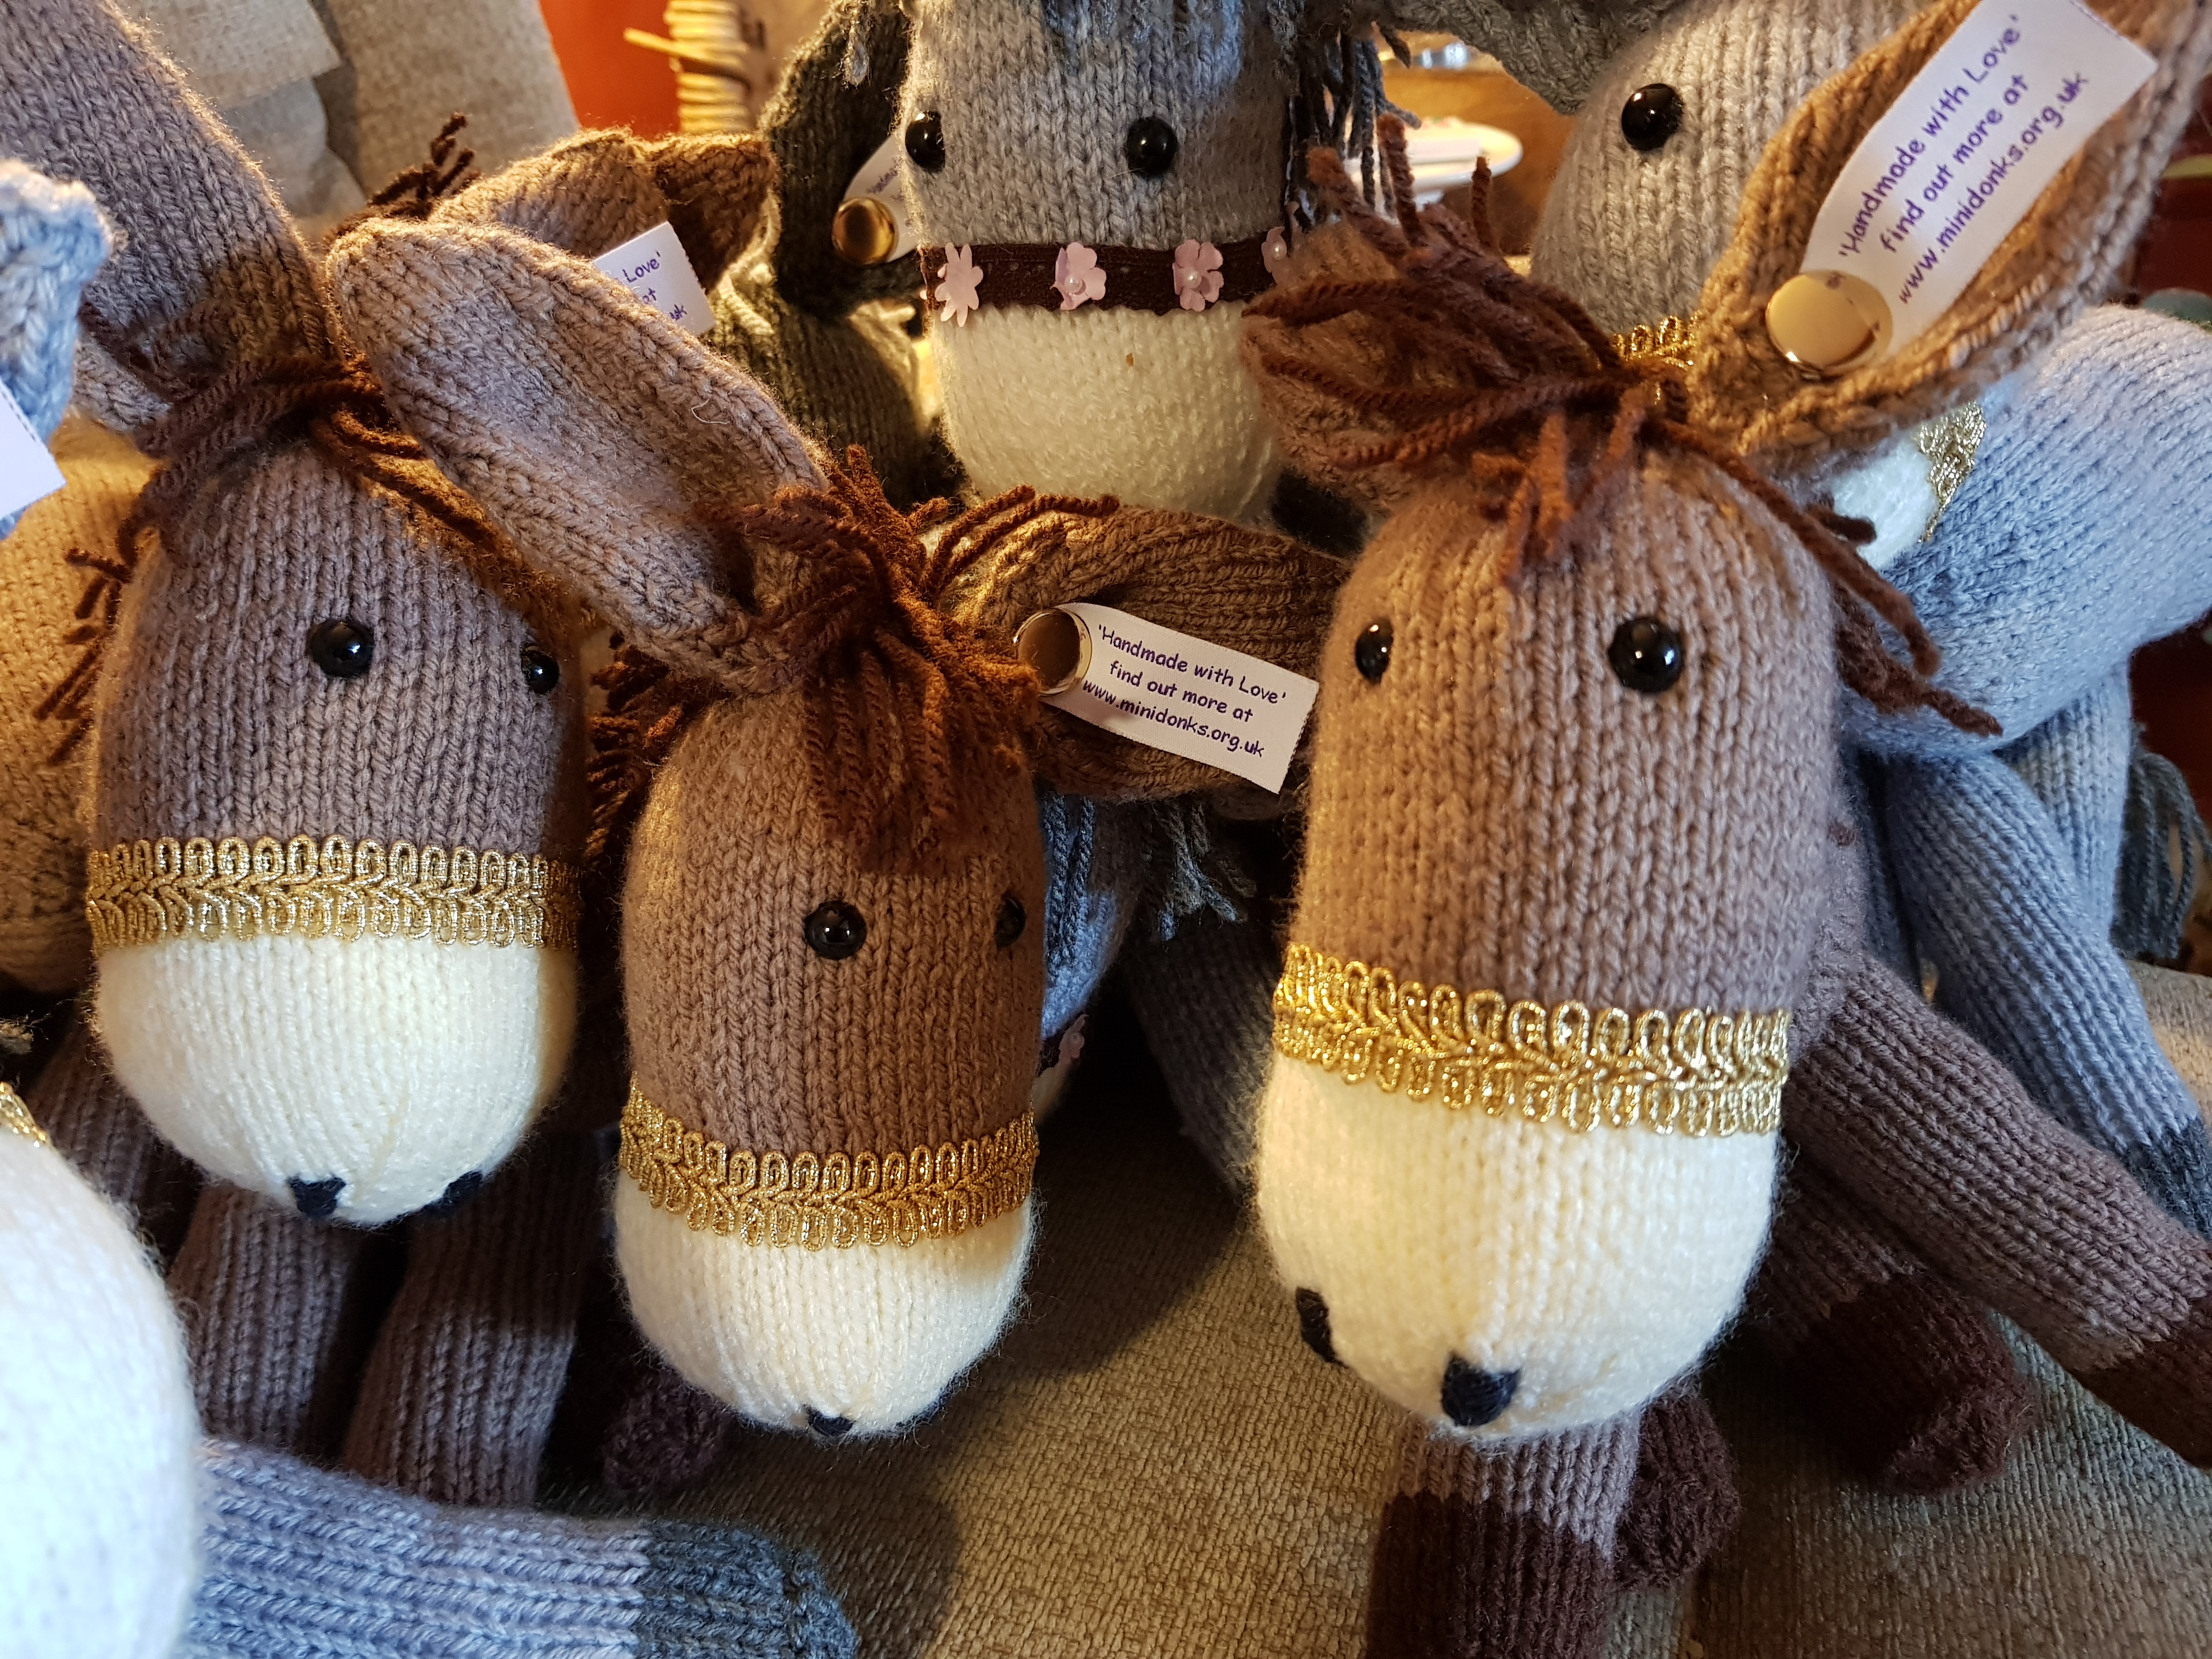 The woollen miniature donkey toys will be sold at a pop-up Christmas shop to support social enterprise Miniature Donkeys for Wellbeing. (National Lottery/ PA)